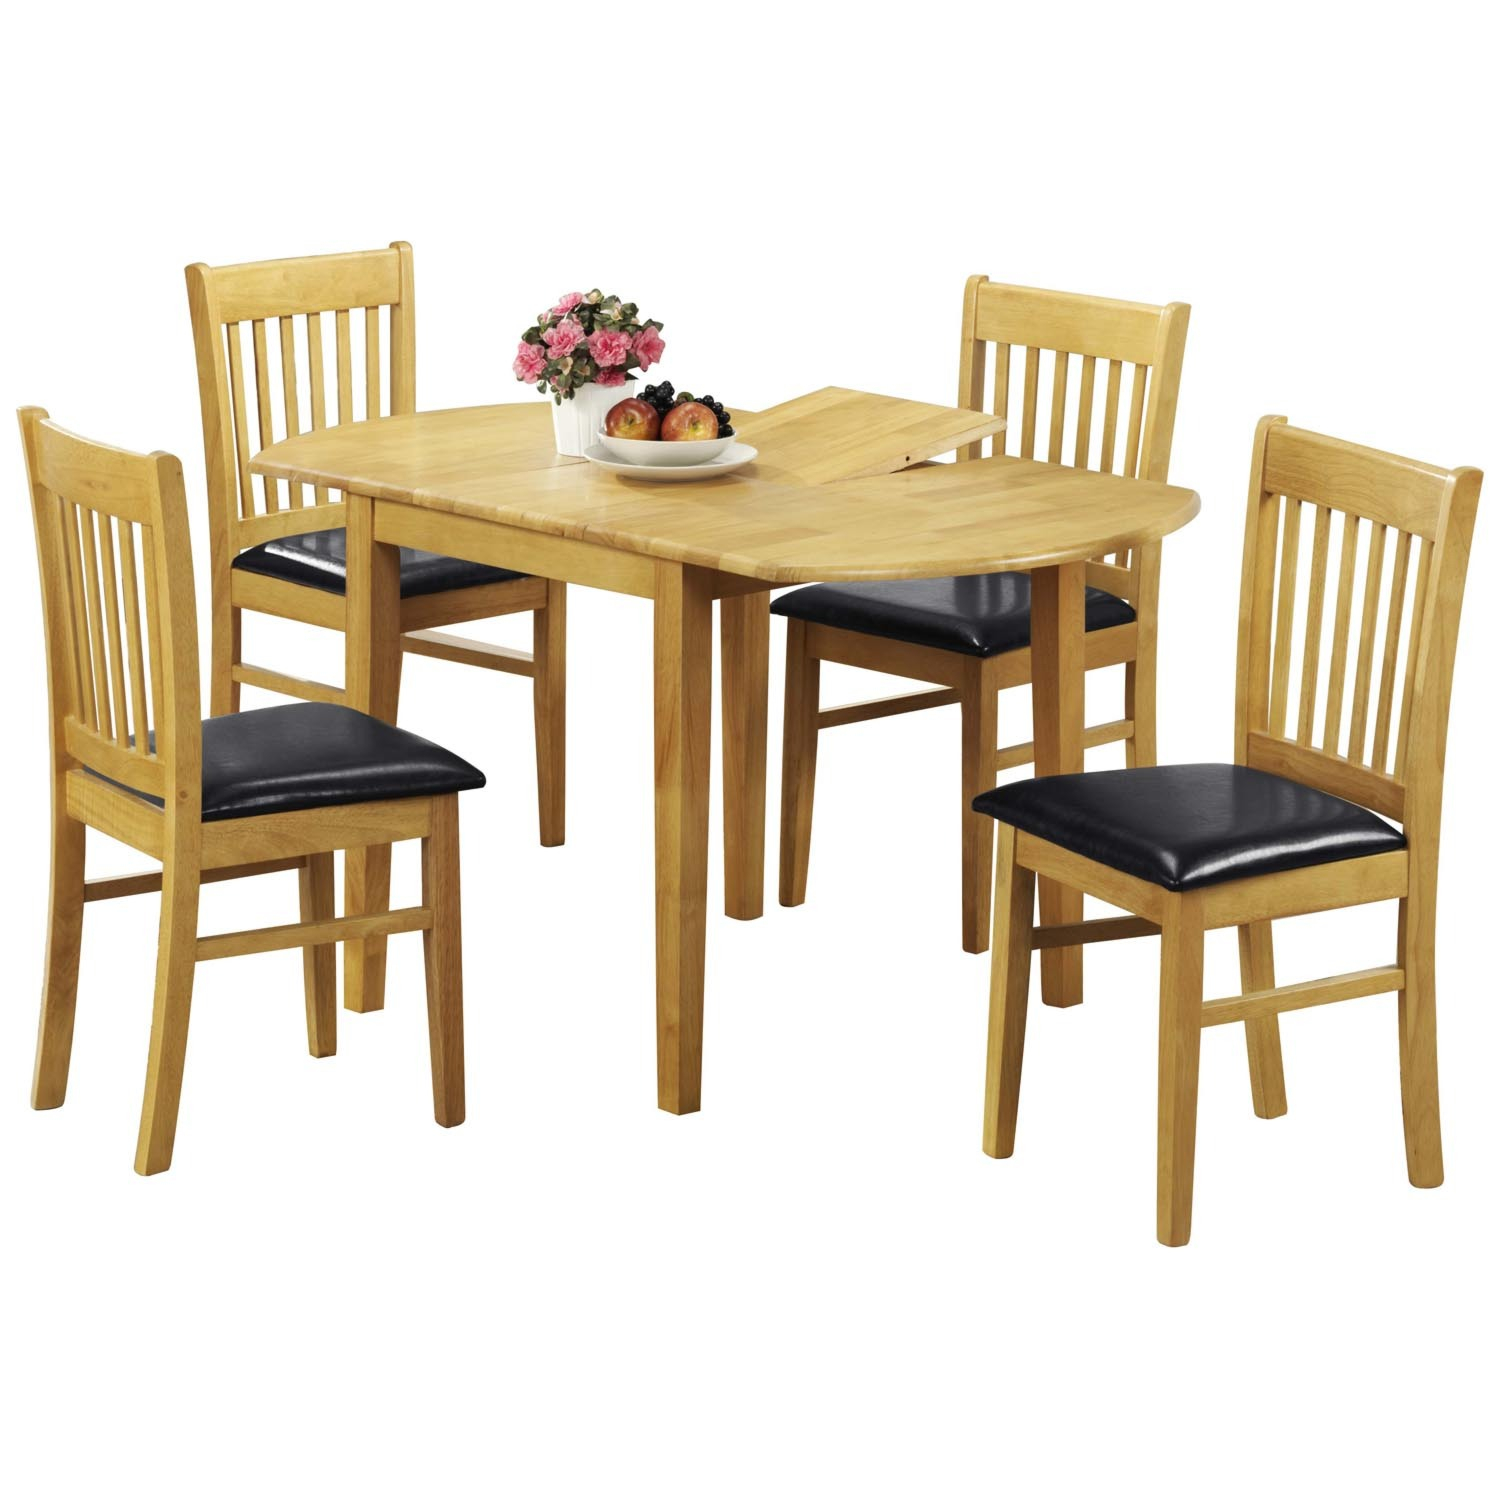 Sussex Dining Table And Four Chairs Set intended for proportions 1500 X 1500